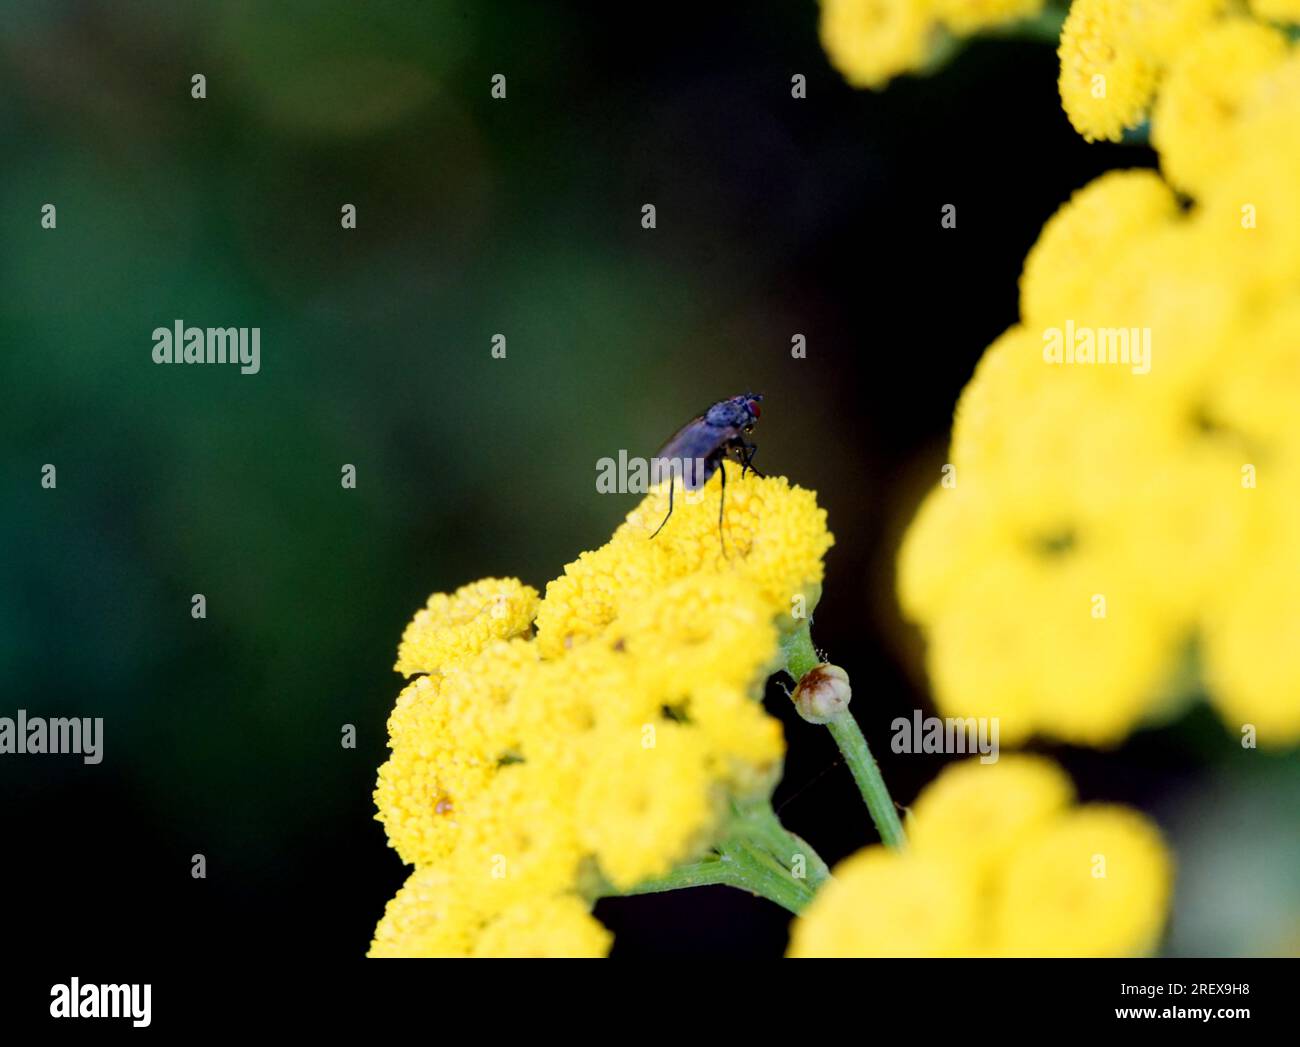 insect on a top of Helichrysum flowers close up. Stock Photo